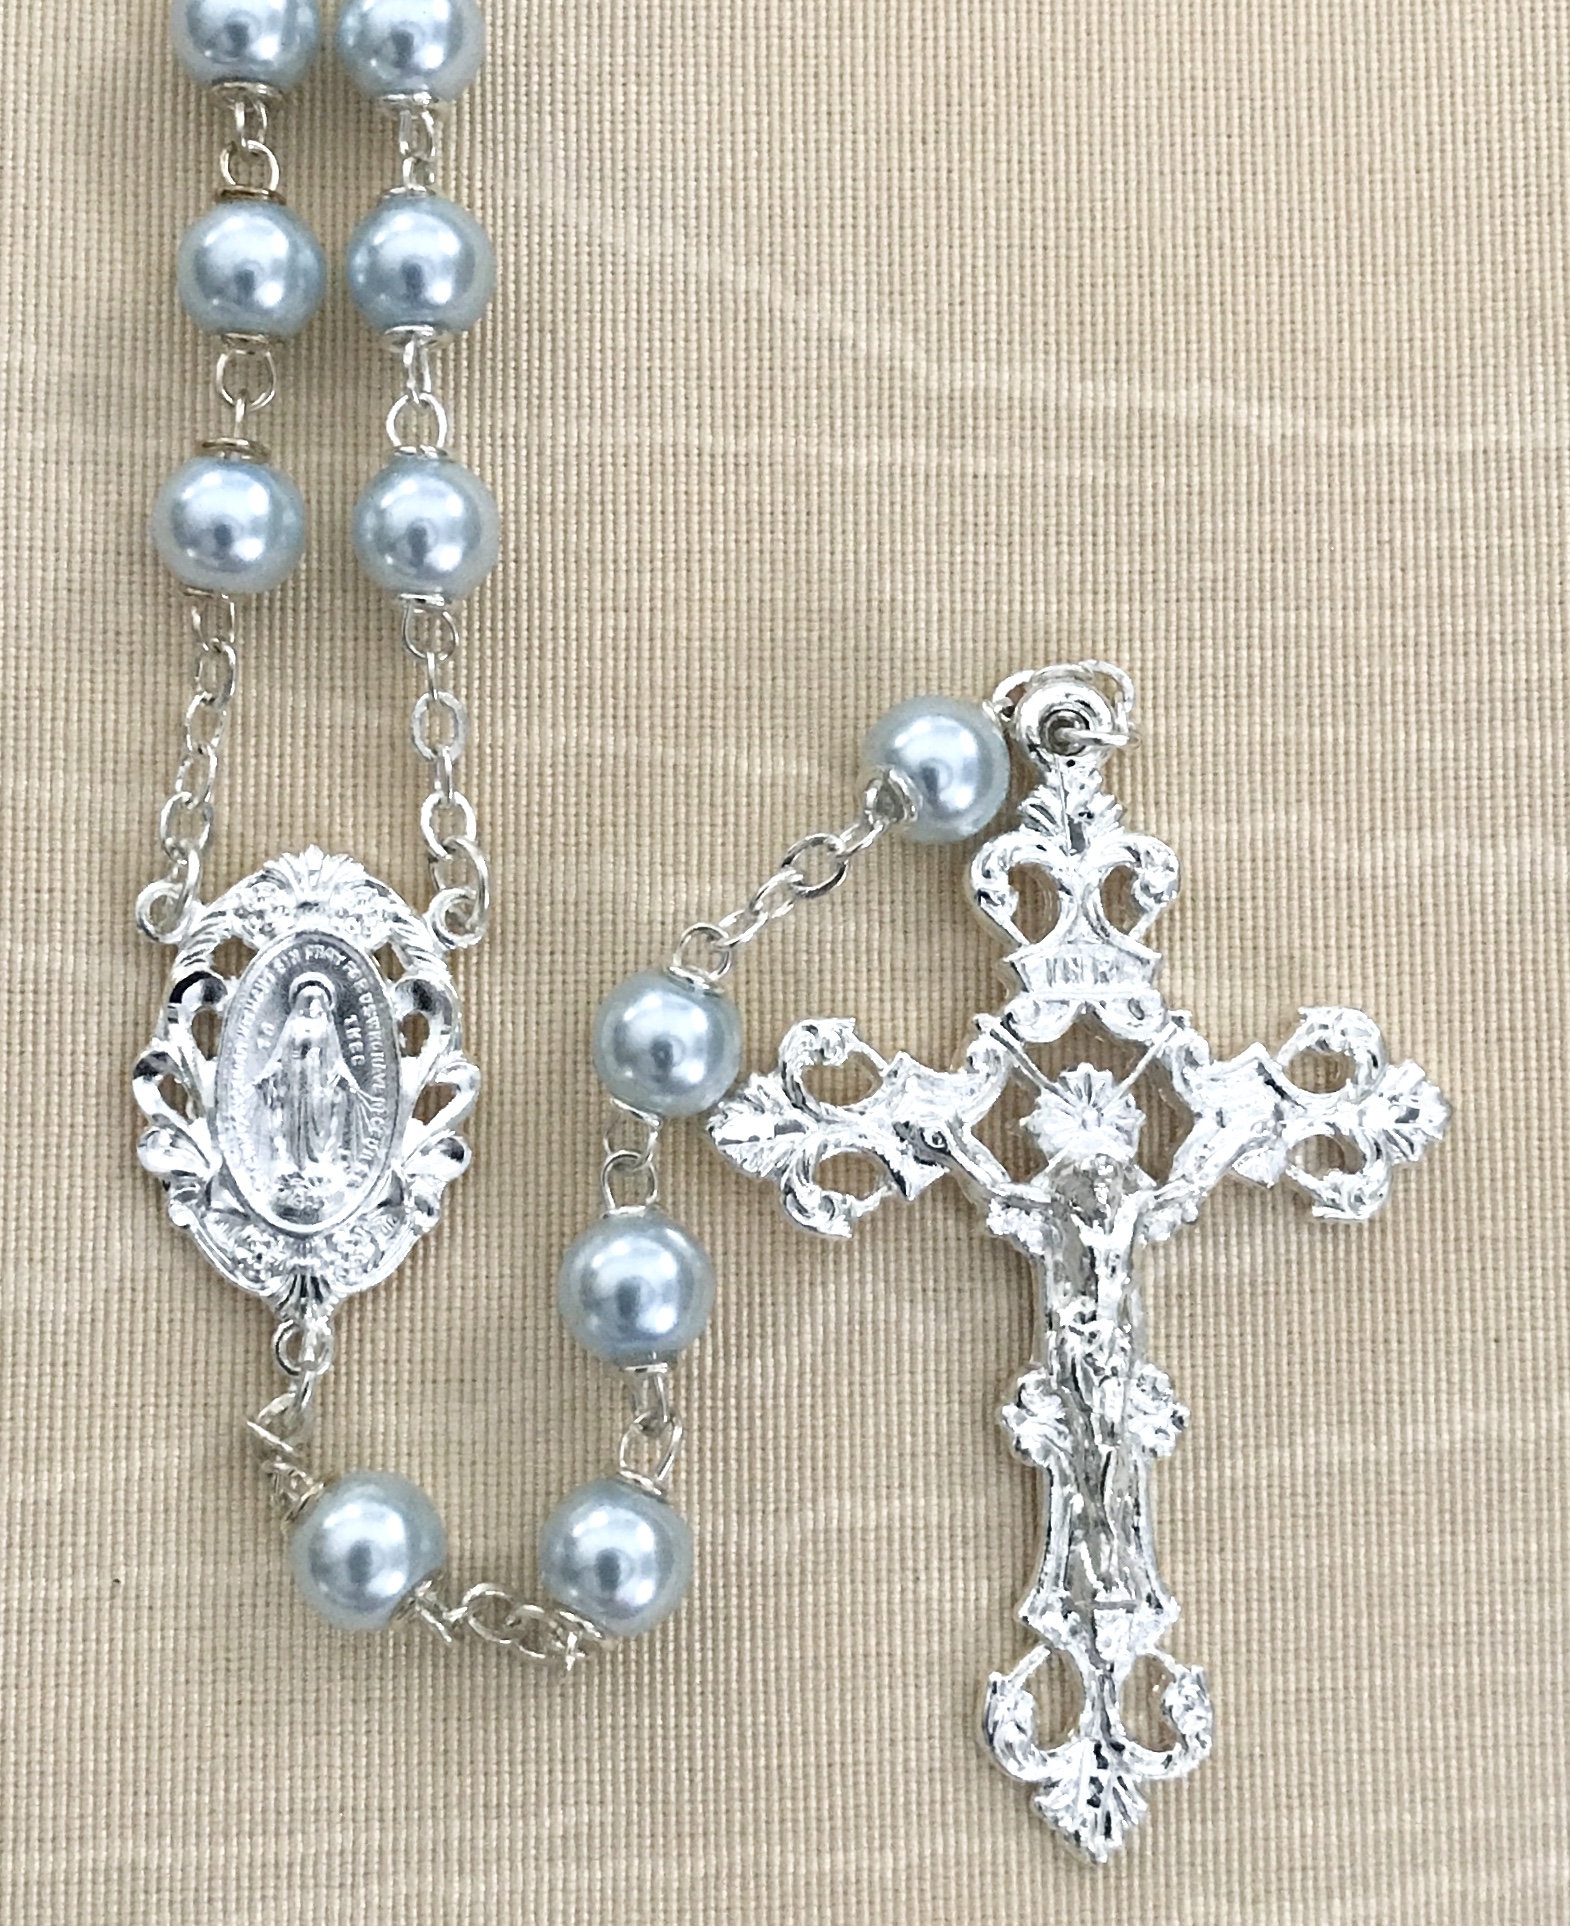 7mm ROUND LIGHT BLUE PEARL ROSARY WITH STERLING SILVER PLATED CRUCIFIX AND CENTER GIFT BOXED